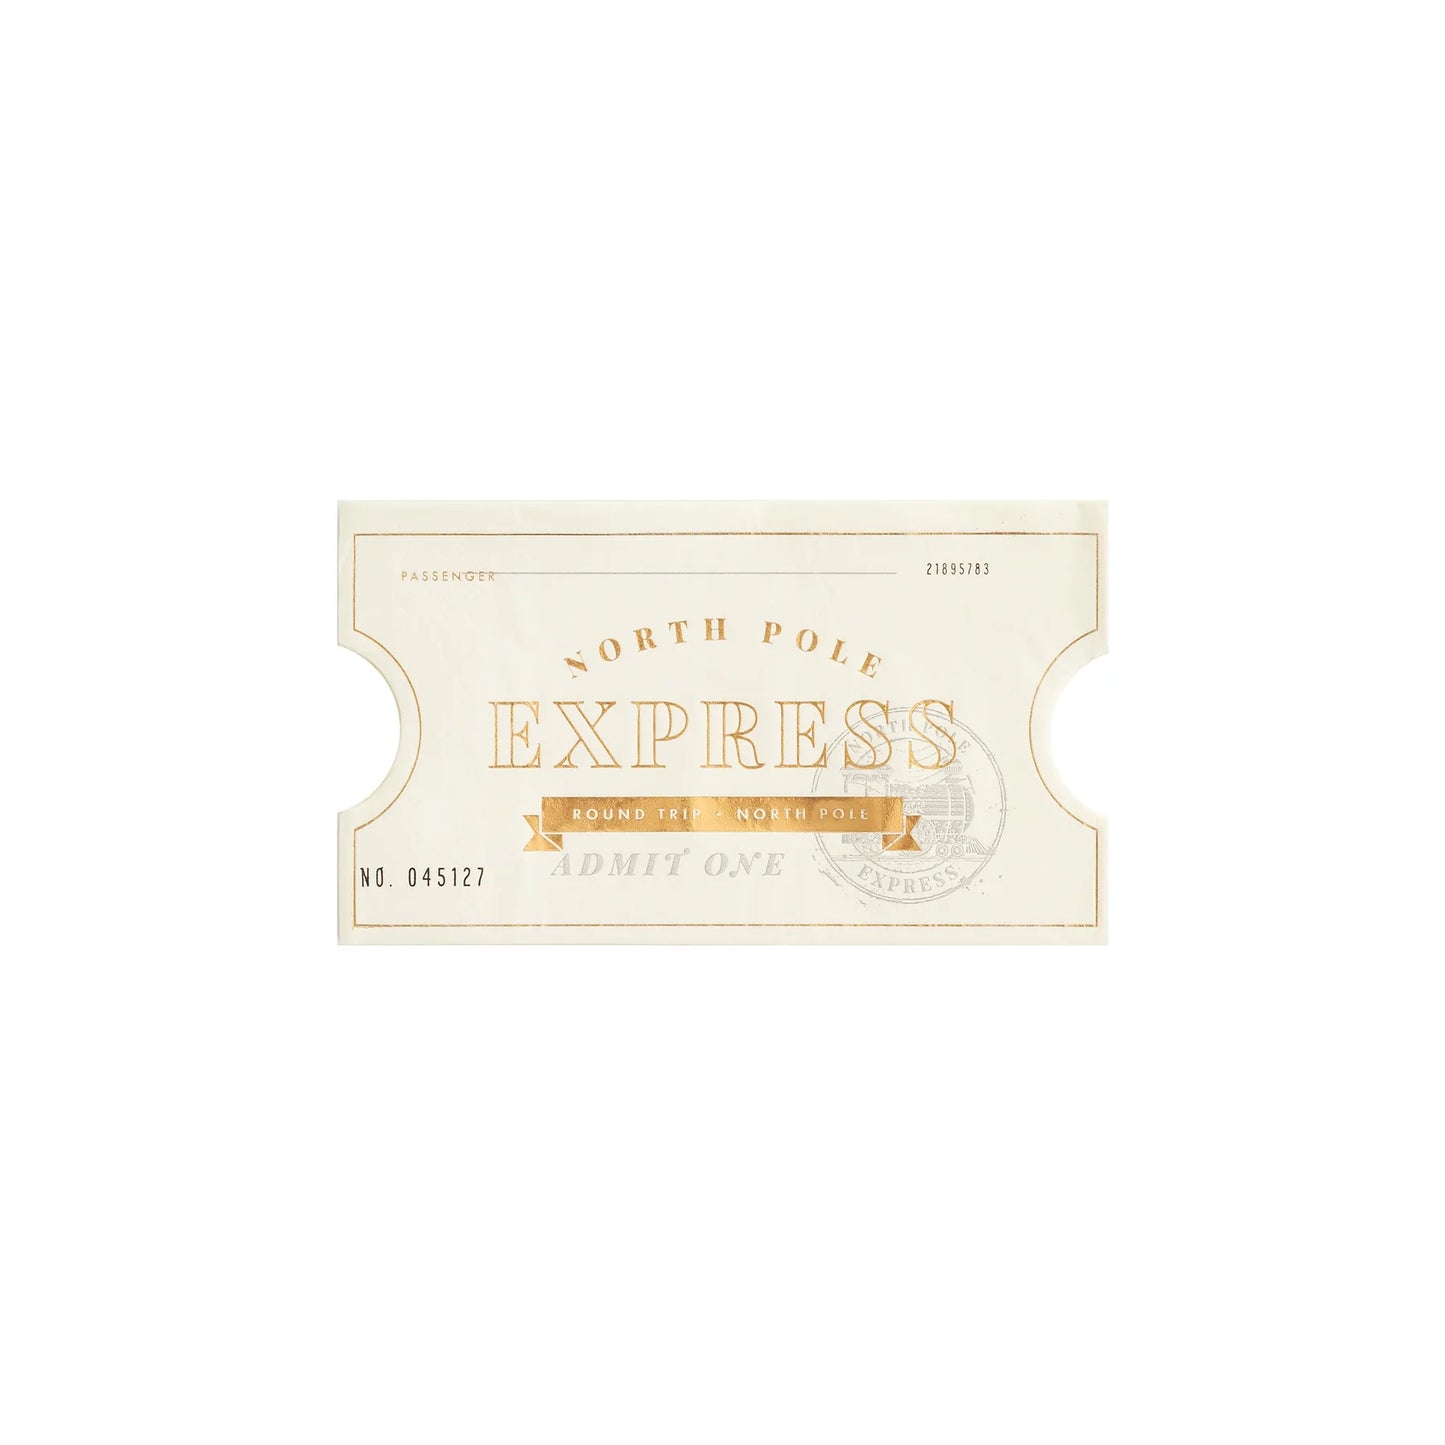 North Pole Express Ticket Guest Napkins (18 Count)